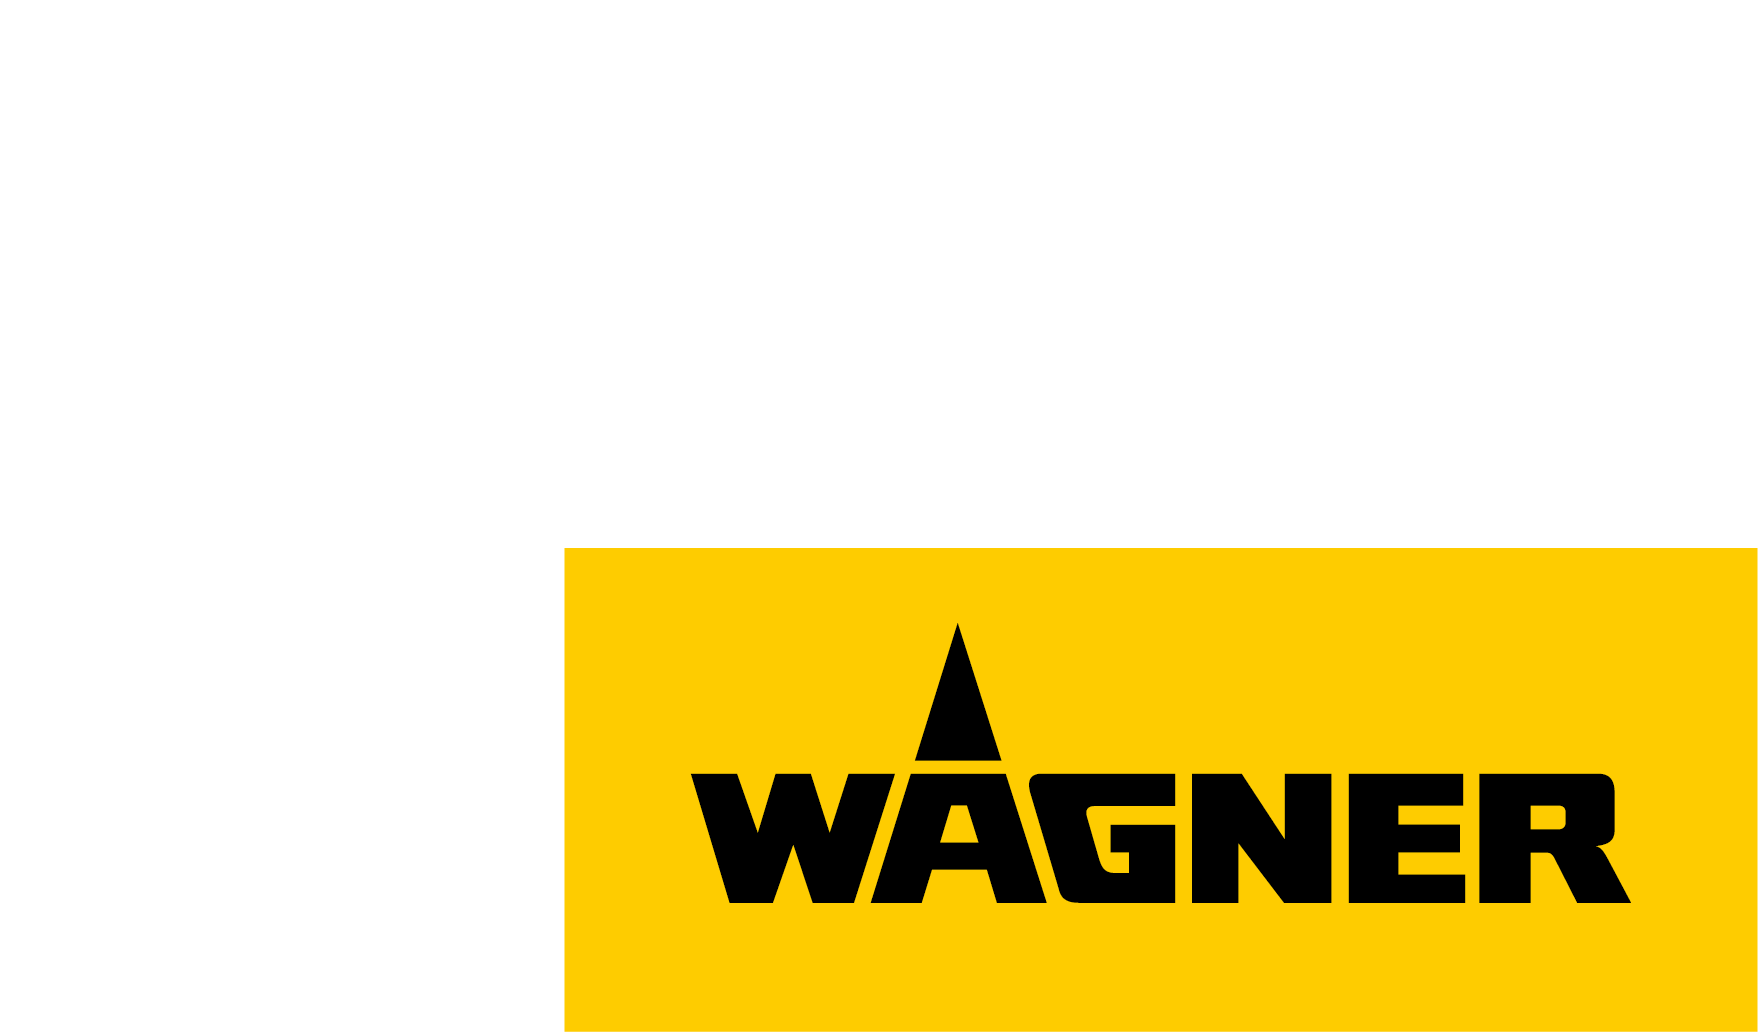 WALTHER Pilot is a proud member of WAGNER